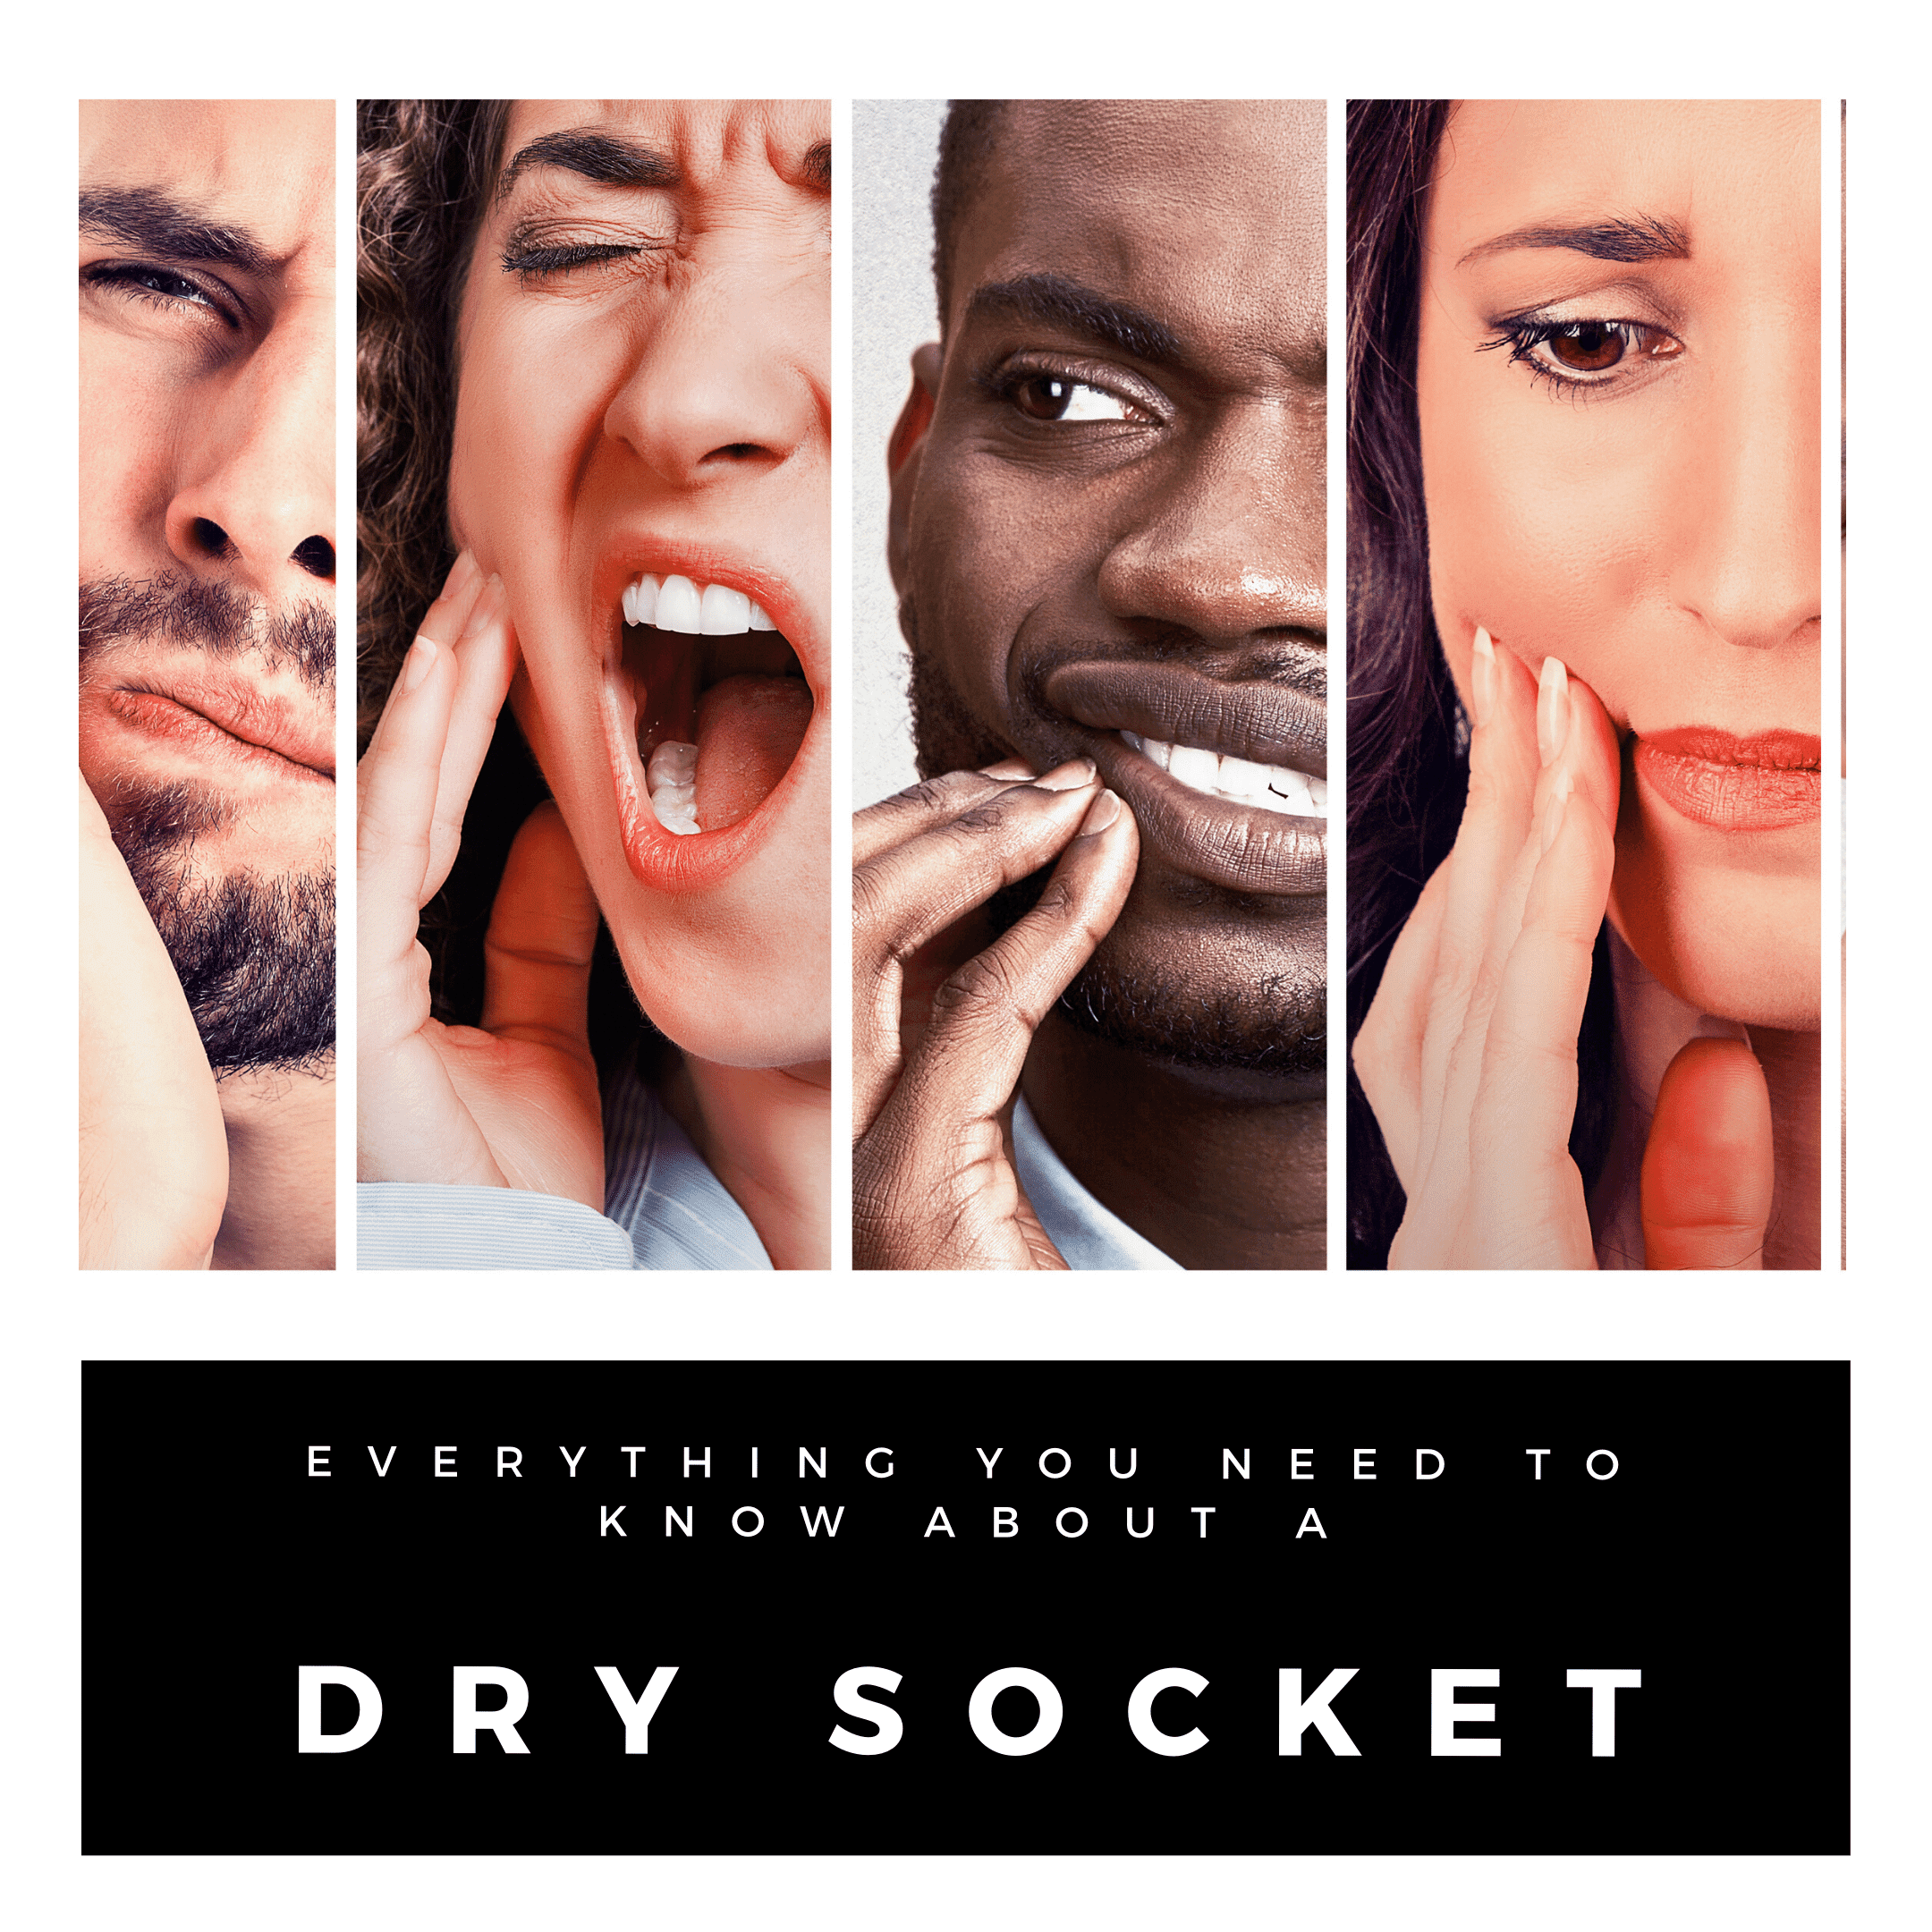 A Dry Socket - What is it, why does it happen, and how is it treated?